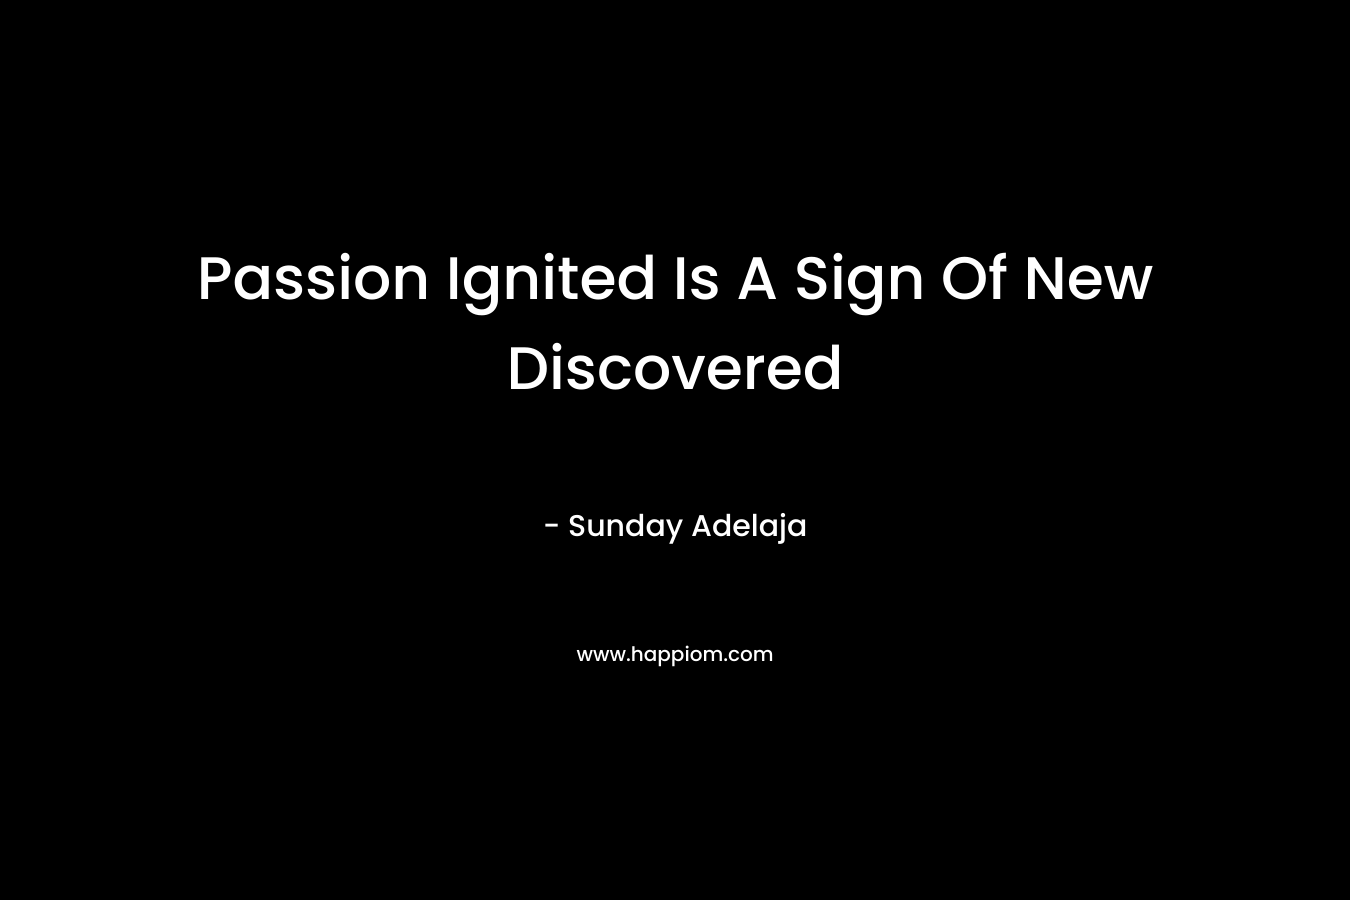 Passion Ignited Is A Sign Of New Discovered